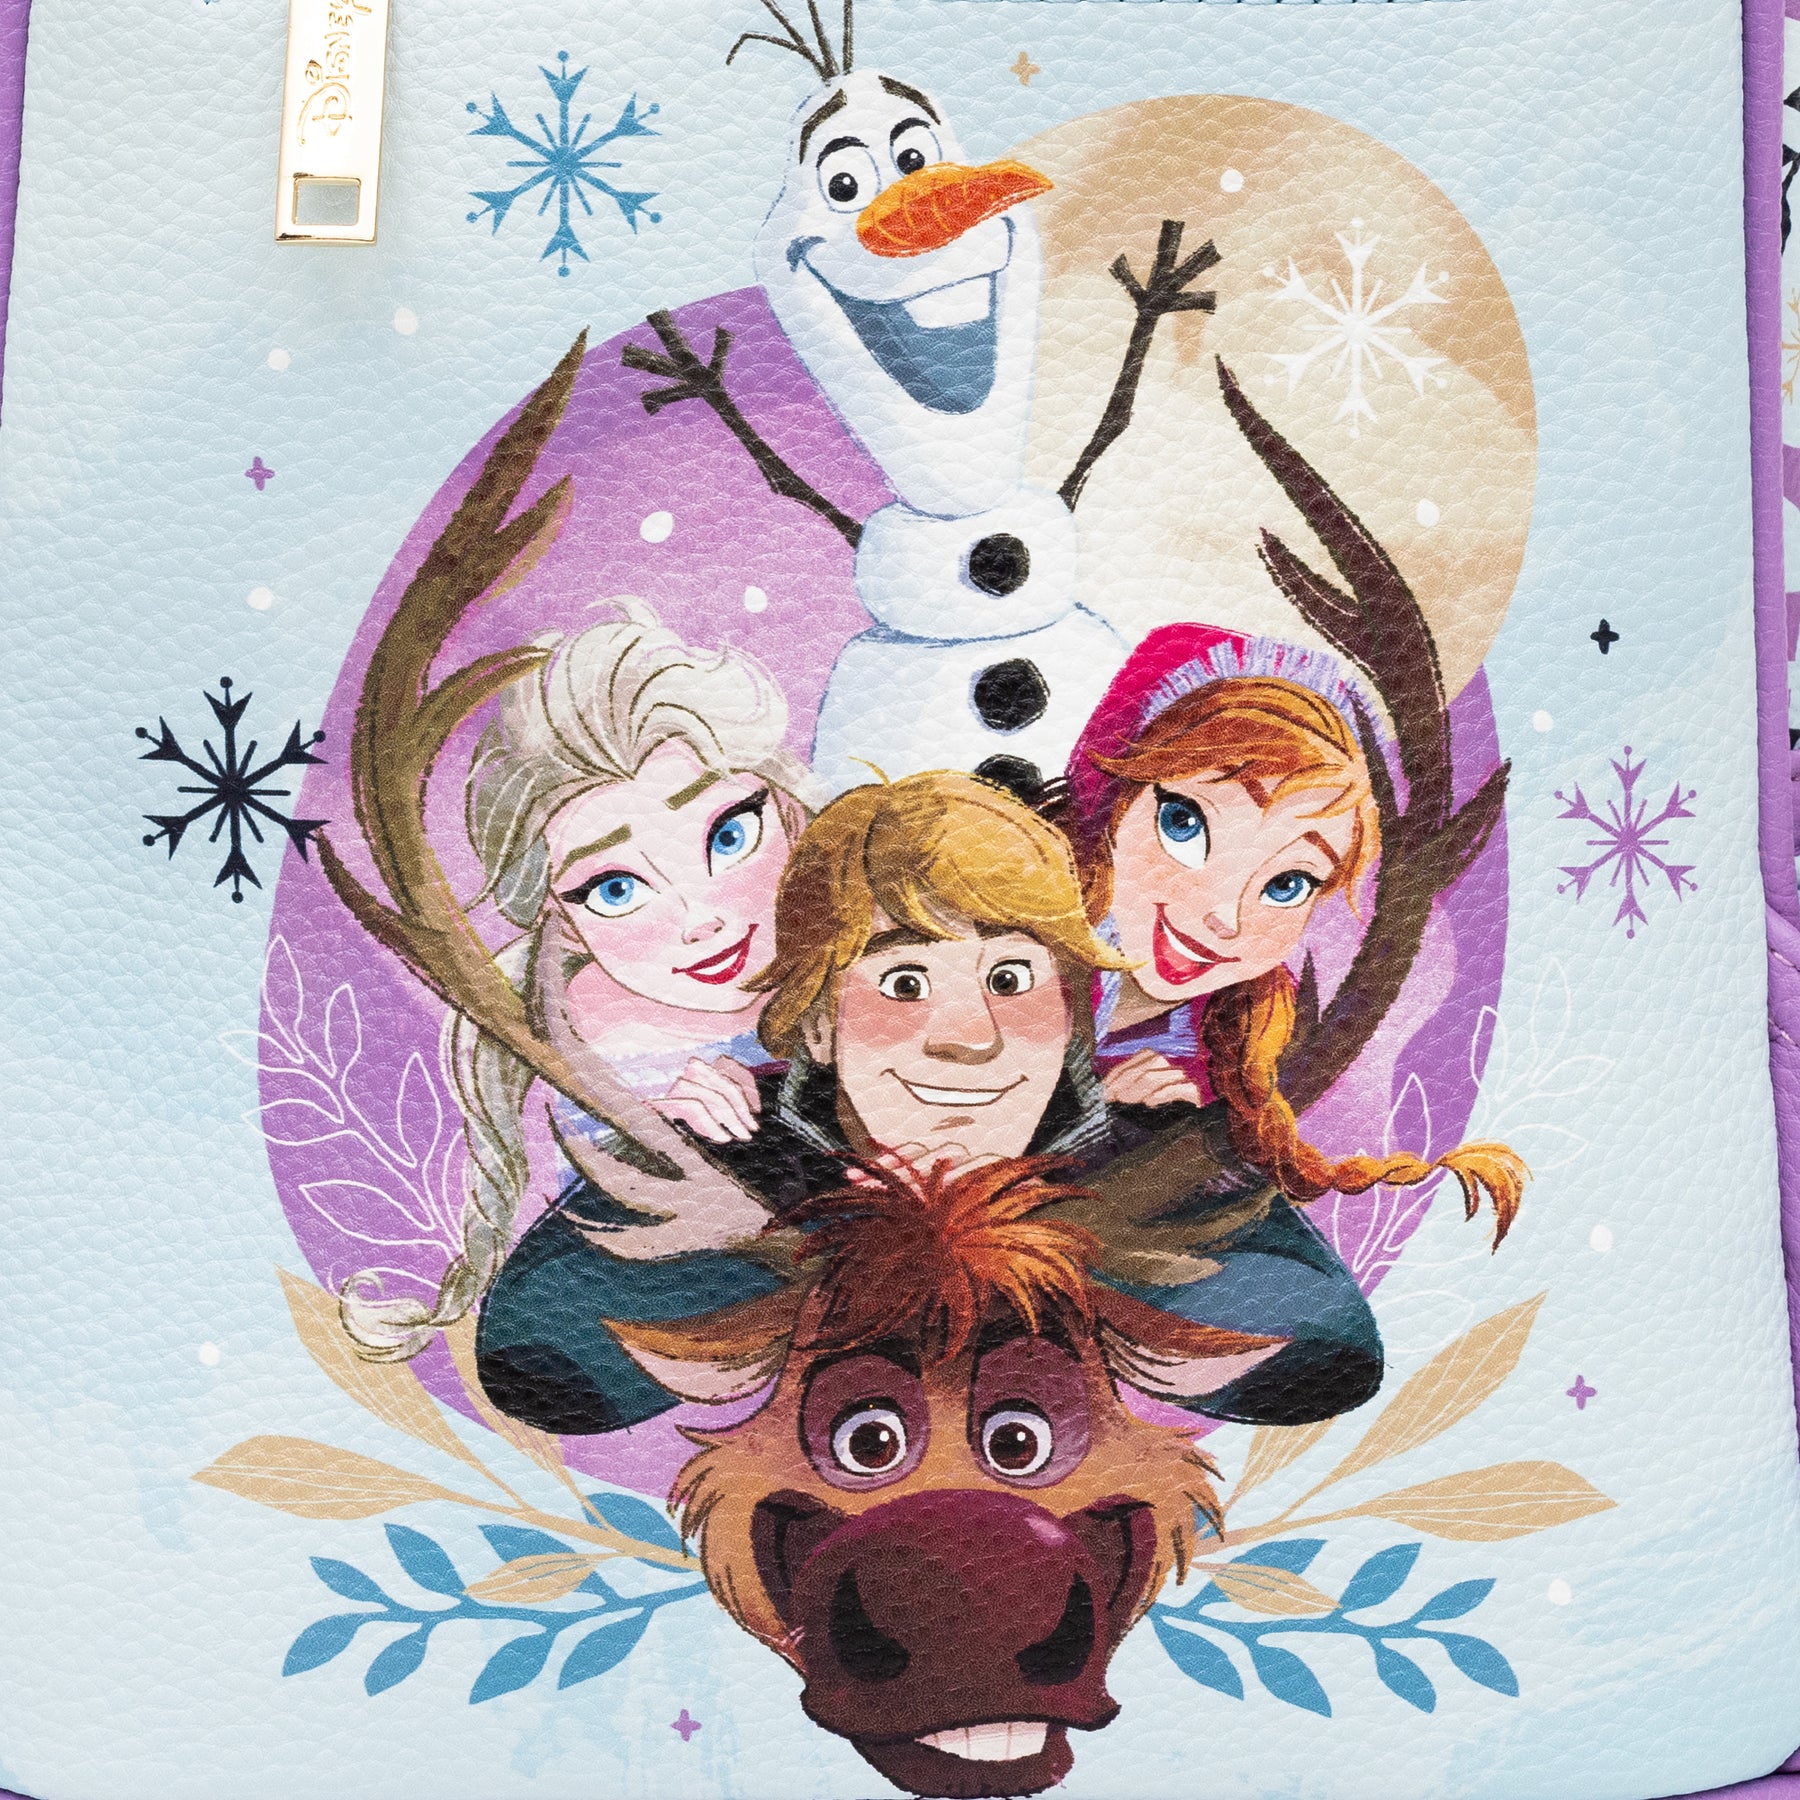 WondaPOP LUXE - Disney Frozen Mini Backpack - Limited Edition - NEW RELEASE  in 2023